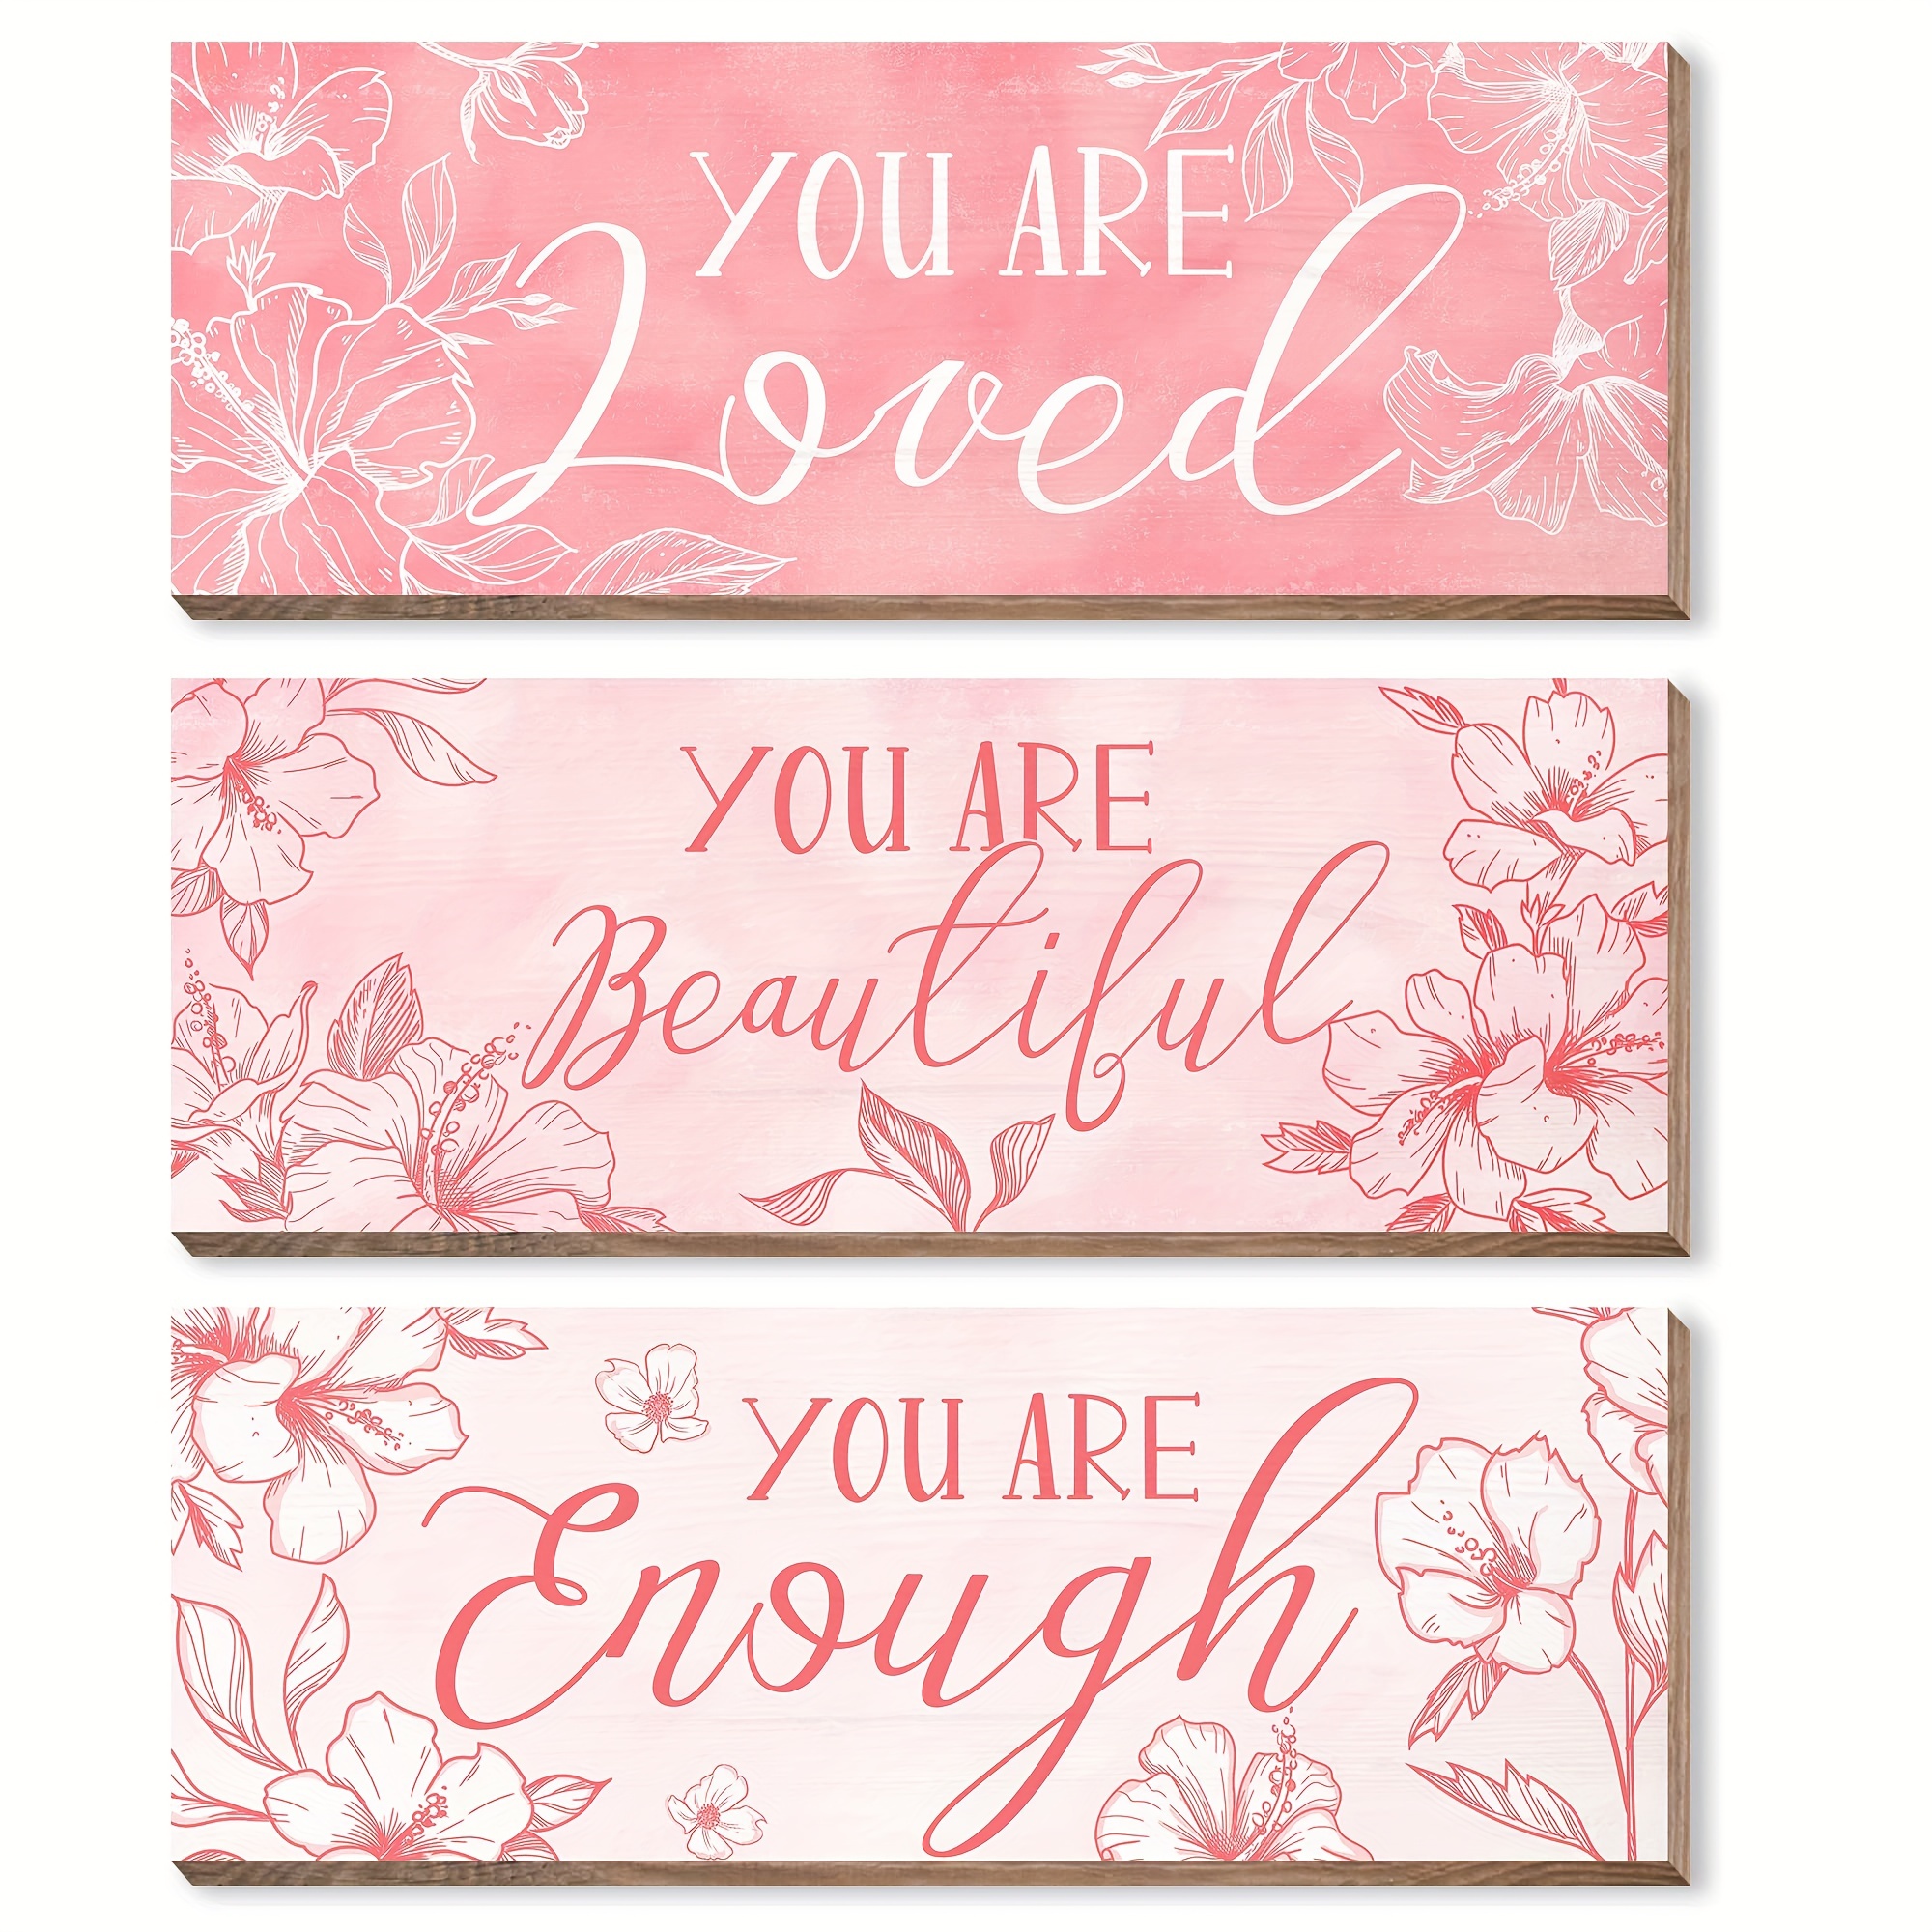 

3pcs You Are Beautiful You Are Enough You Are Loved Sign, Pink Room Decor, Pink Wall Decor, Positive Quotes Inspirational Wall Signs For Women, Wooden Hanging Wall Plaques